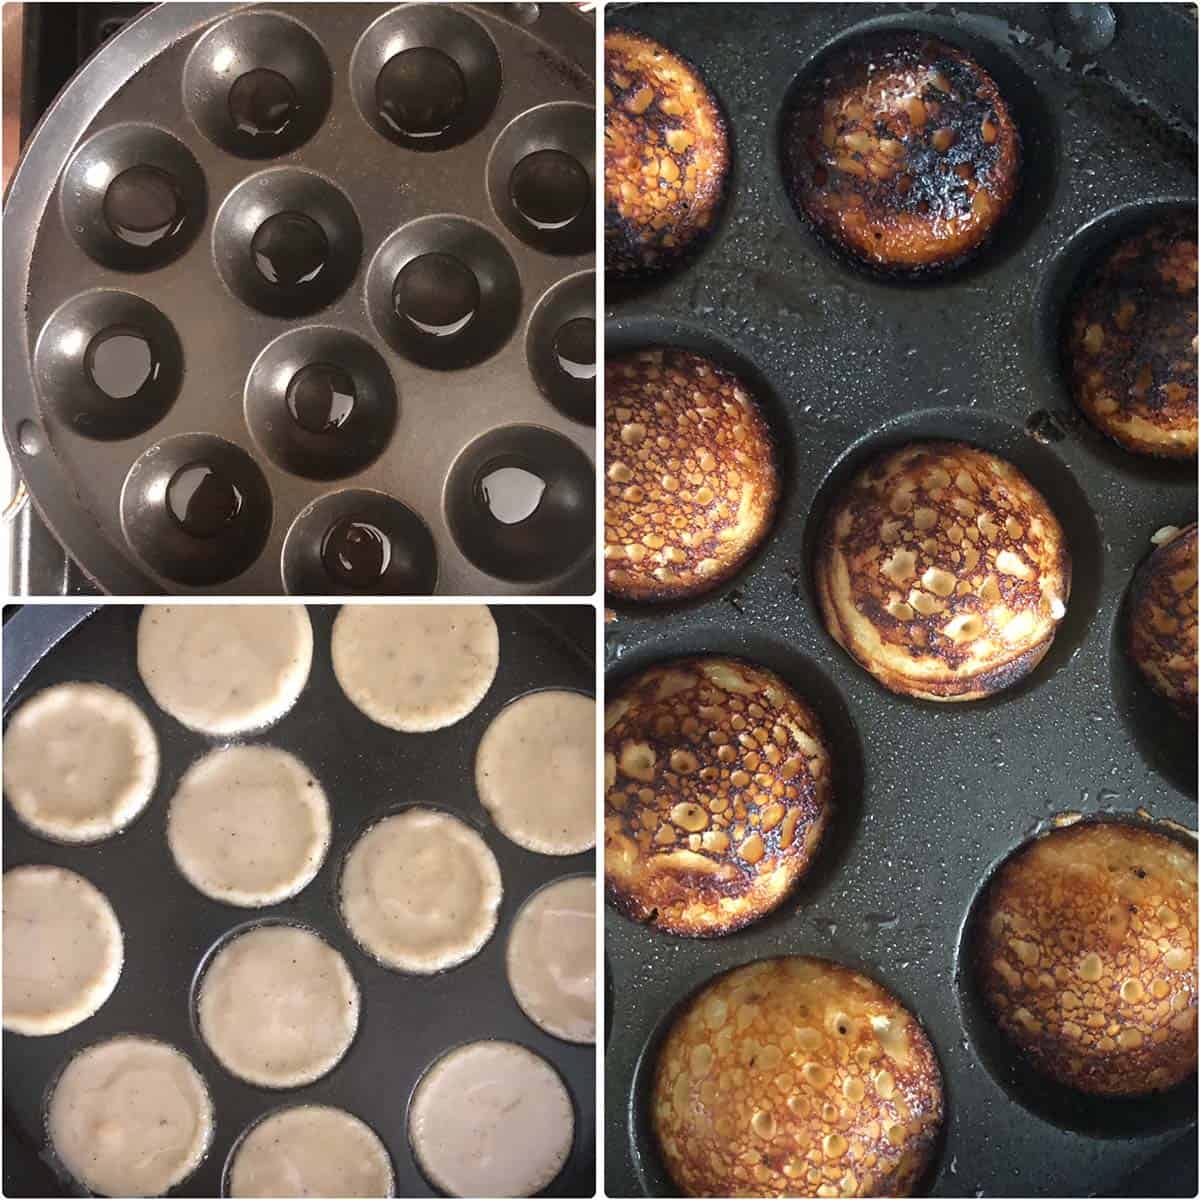 3 panel photo showing the cooking of appam in pan.